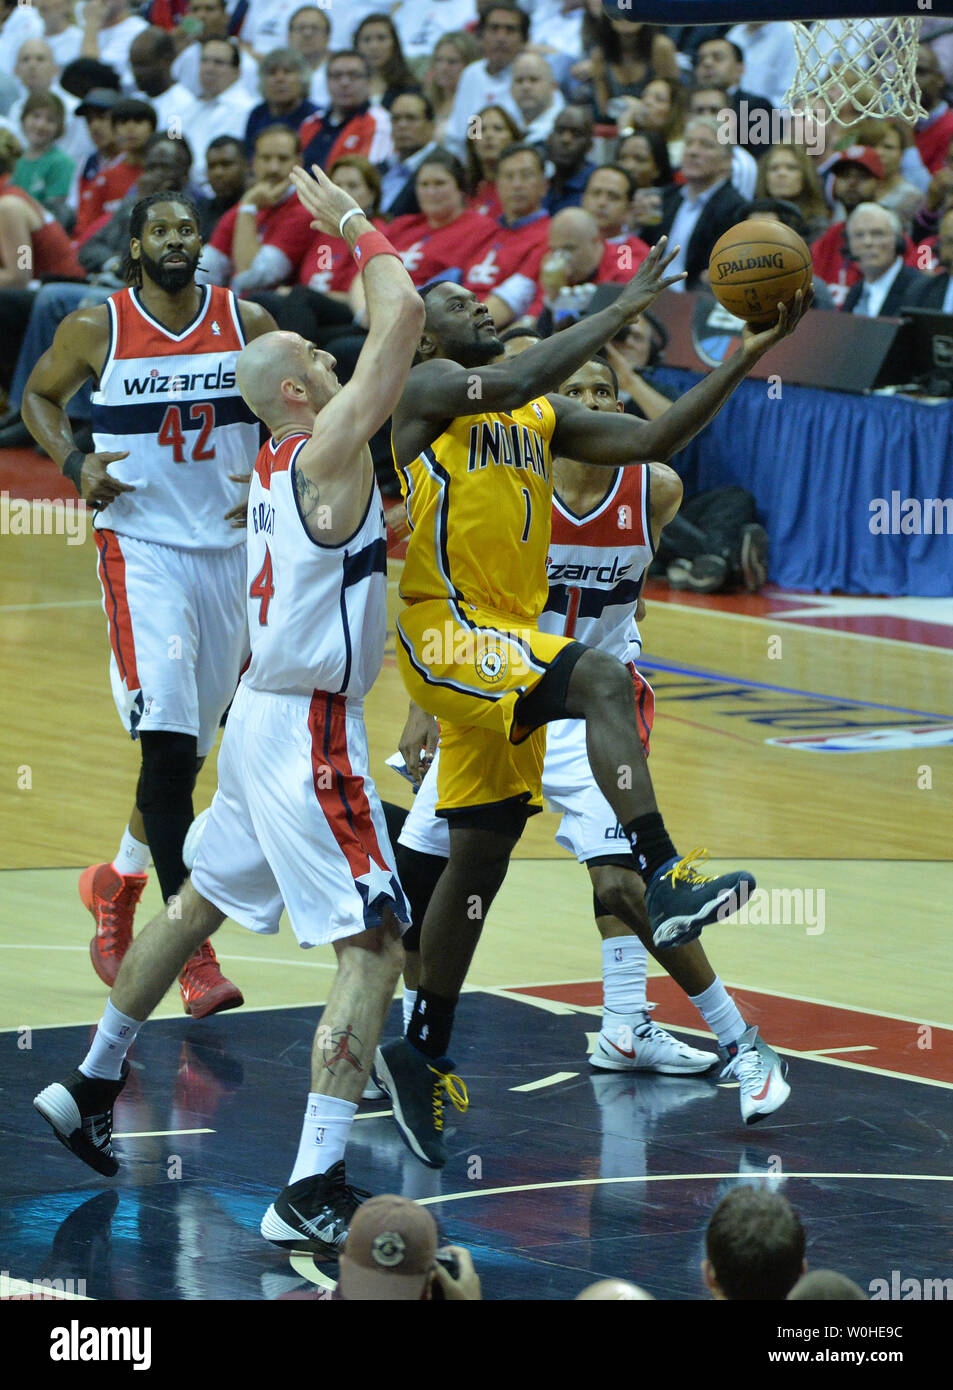 Indiana Pacers guard Lance Stephenson (1) drives to the basket against the Washington Wizards during the 1st half of game six of the Eastern Conference Semifinals at the Verizon Center in Washington, D.C. on May 15, 2014. UPI/Kevin Dietsch Stock Photo